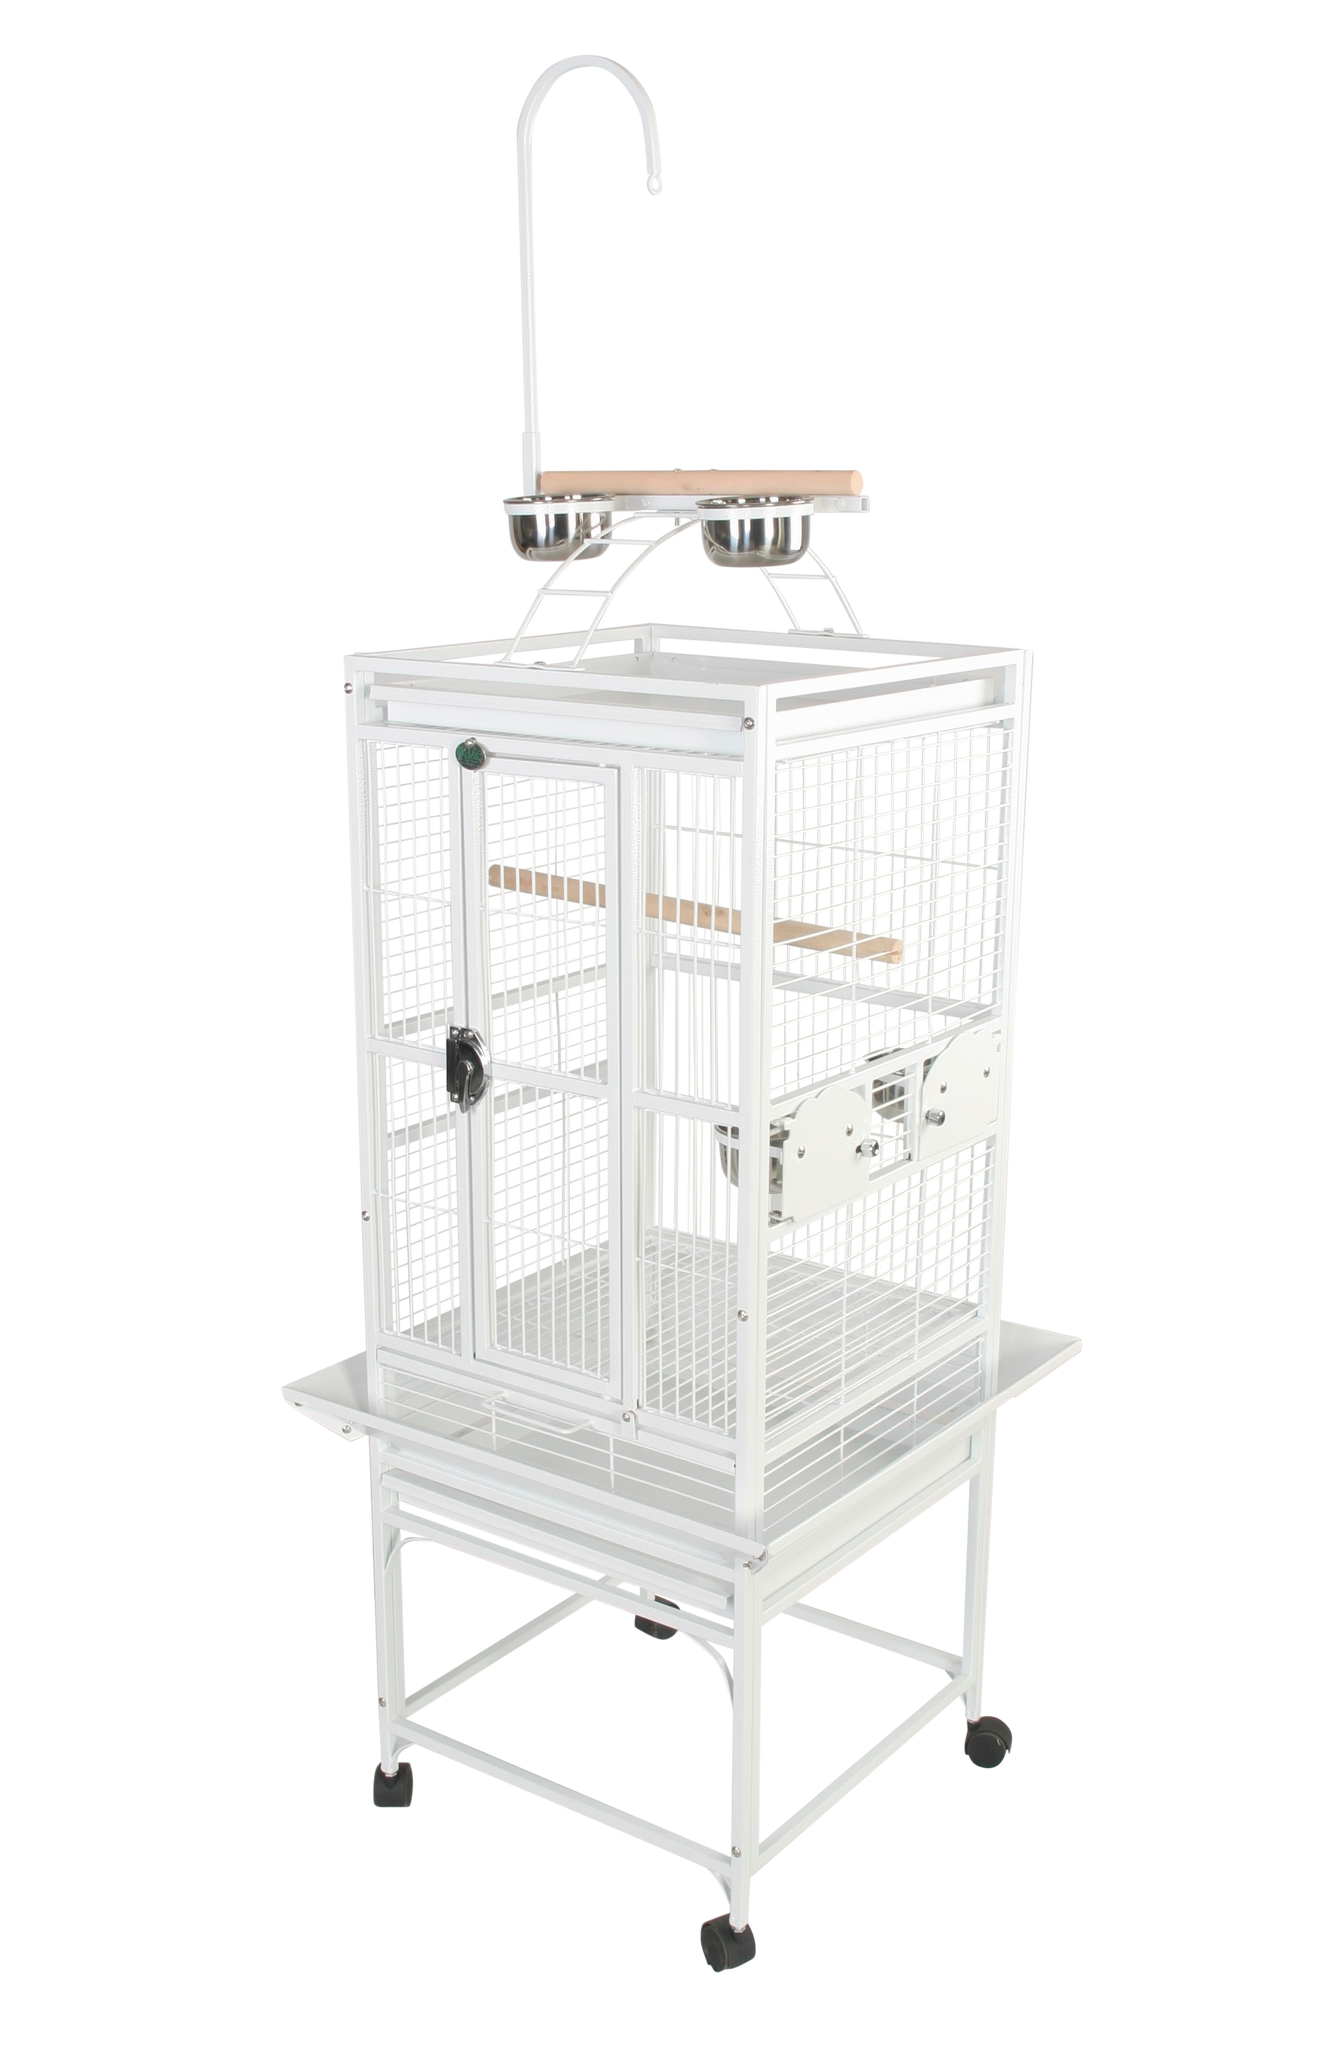 A&E Play Top Bird Cage - Fun and Secure Habitat for Small Birds